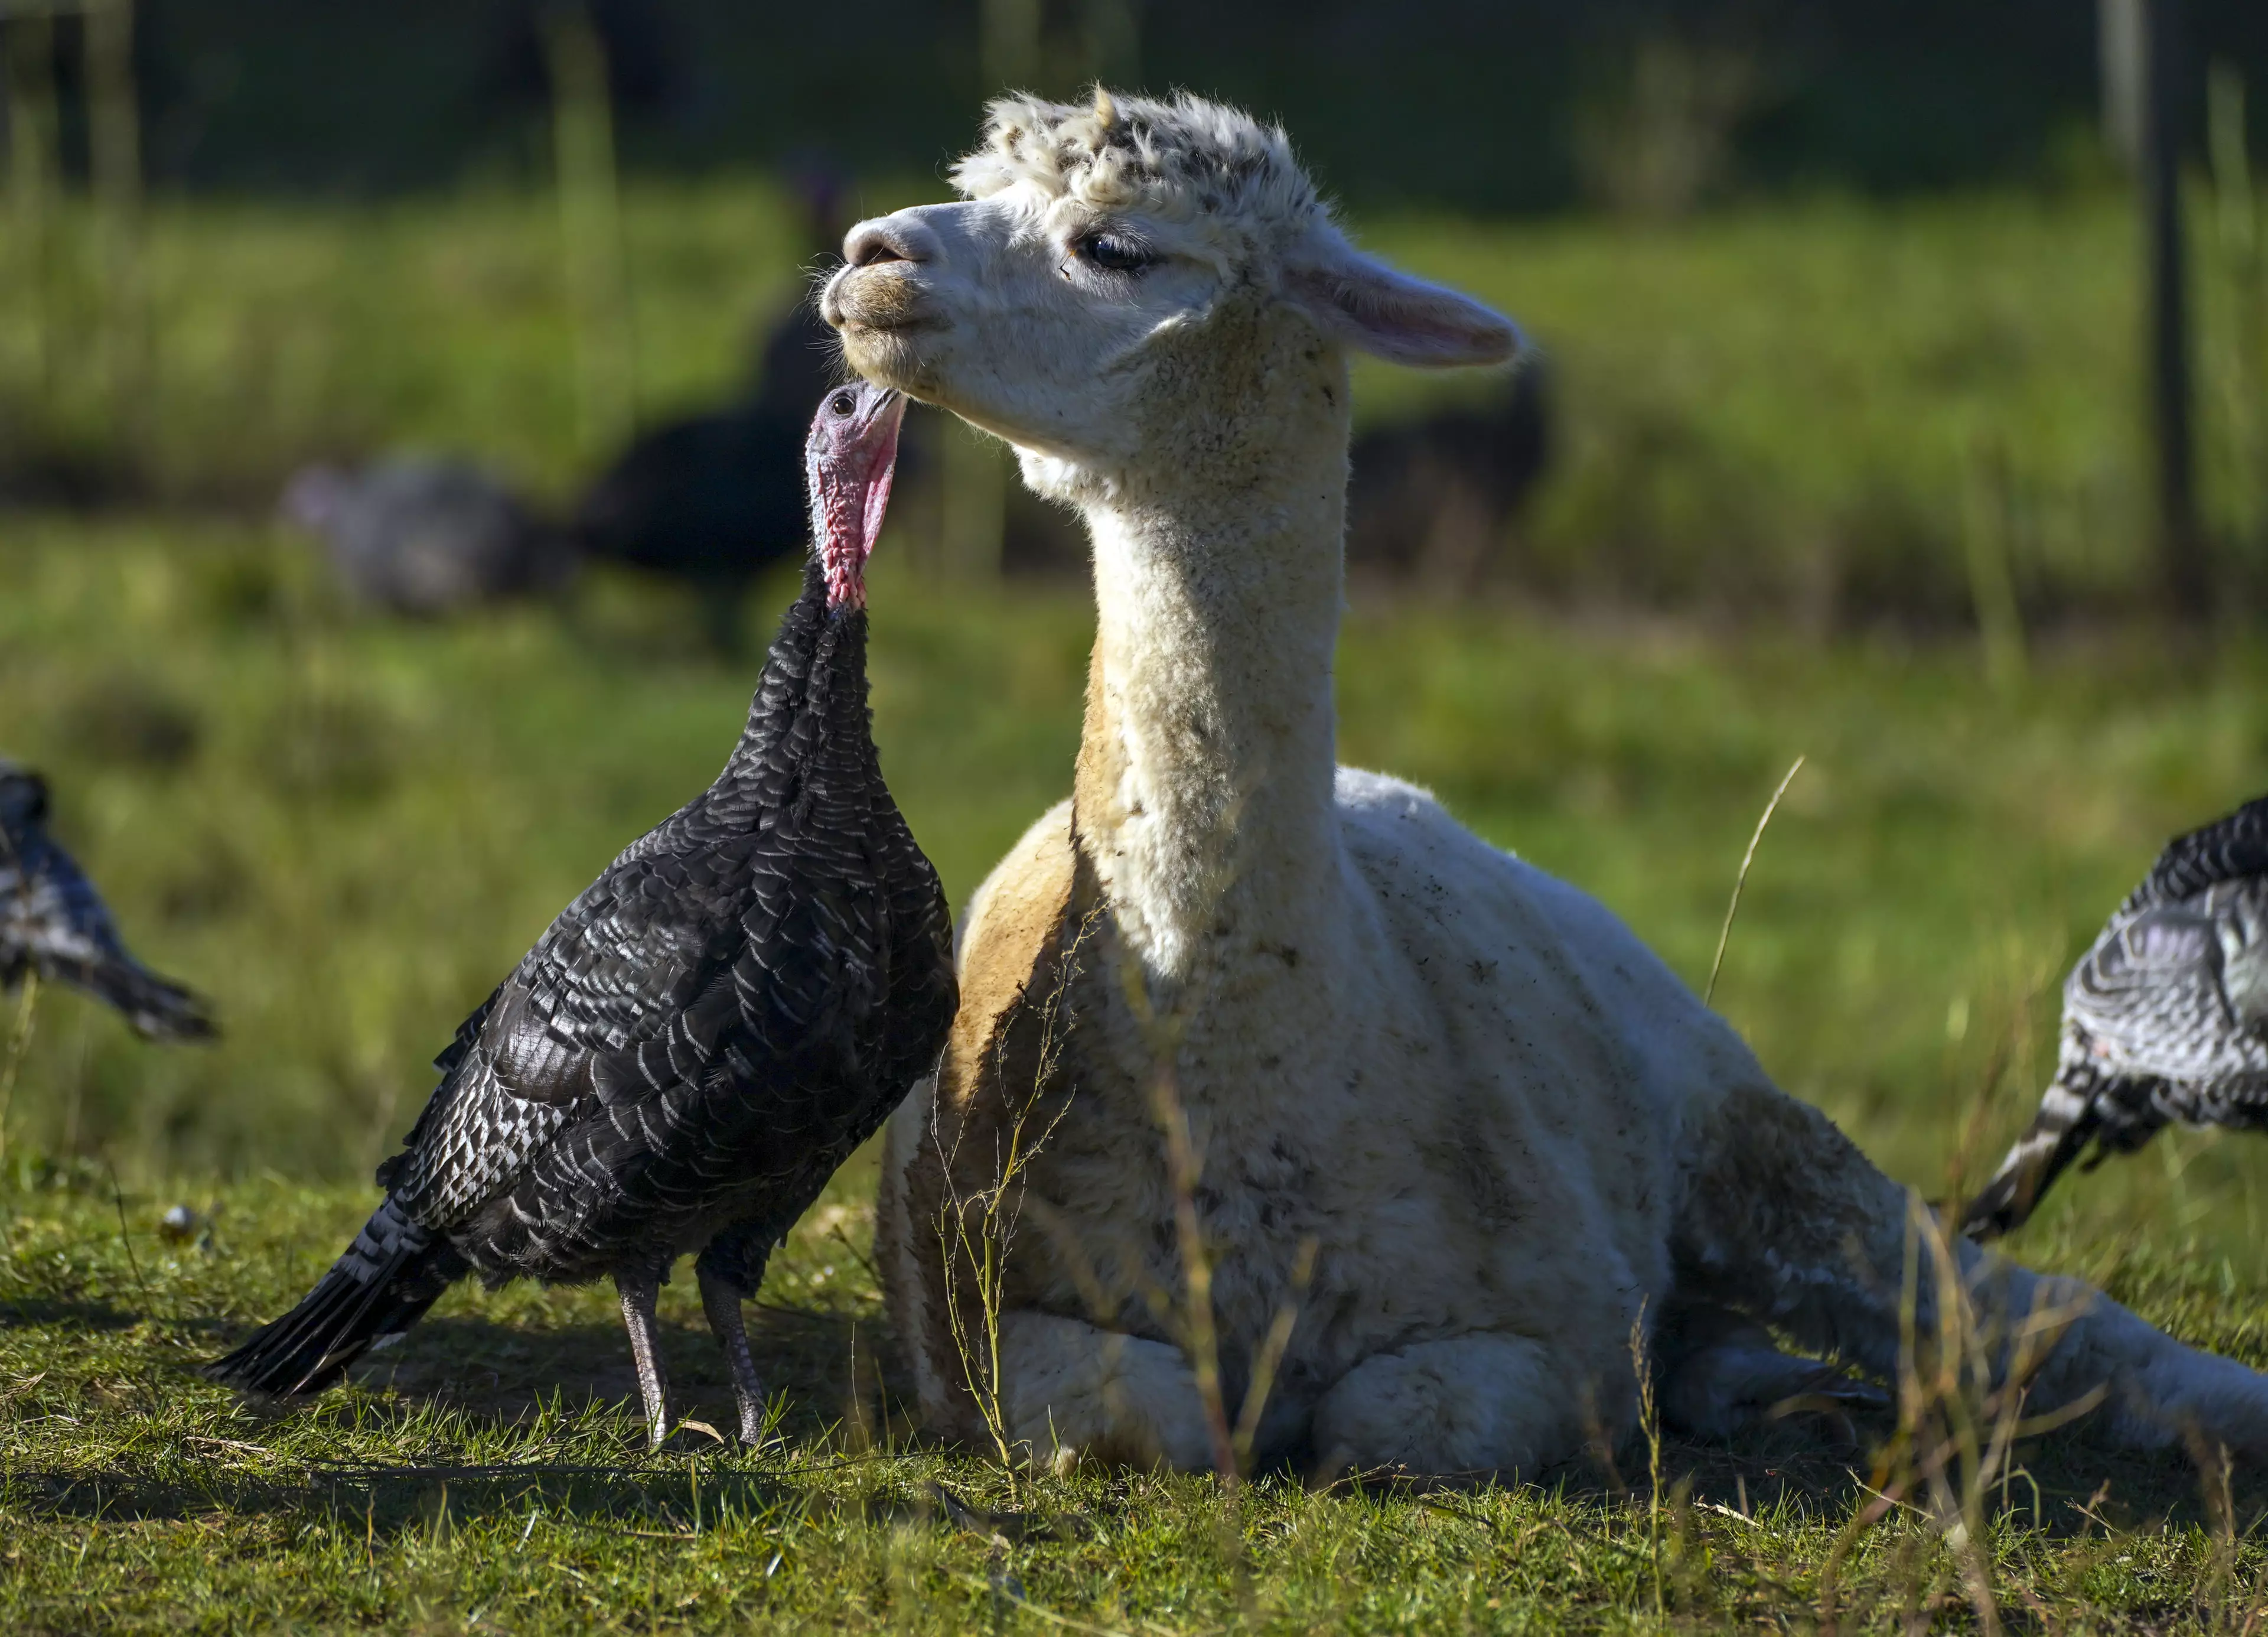 It seems as if the alpacas and the turkeys are getting along just fine!